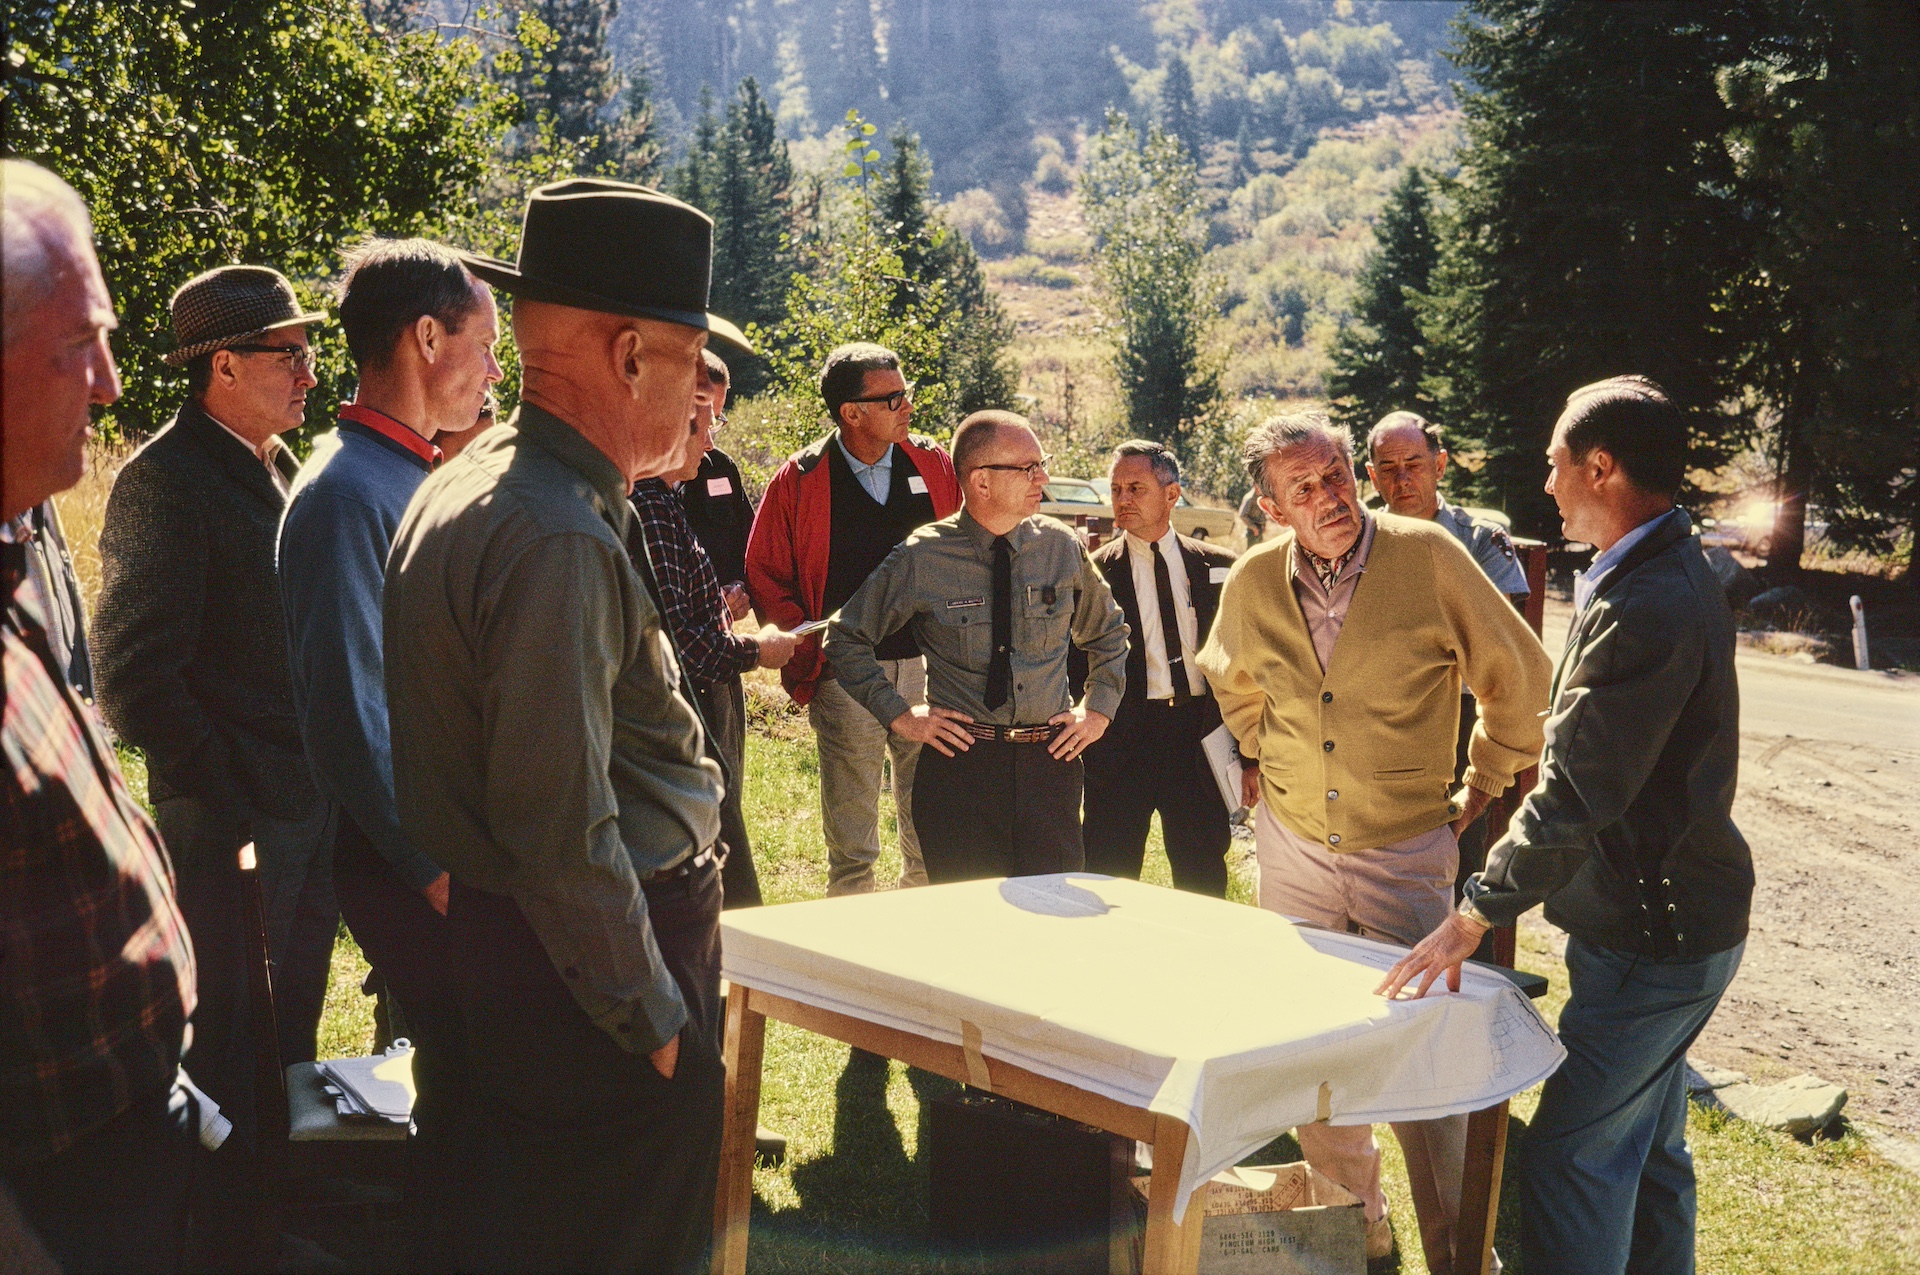 Walt Disney and Mineral King survey team, outdoors in historical photo